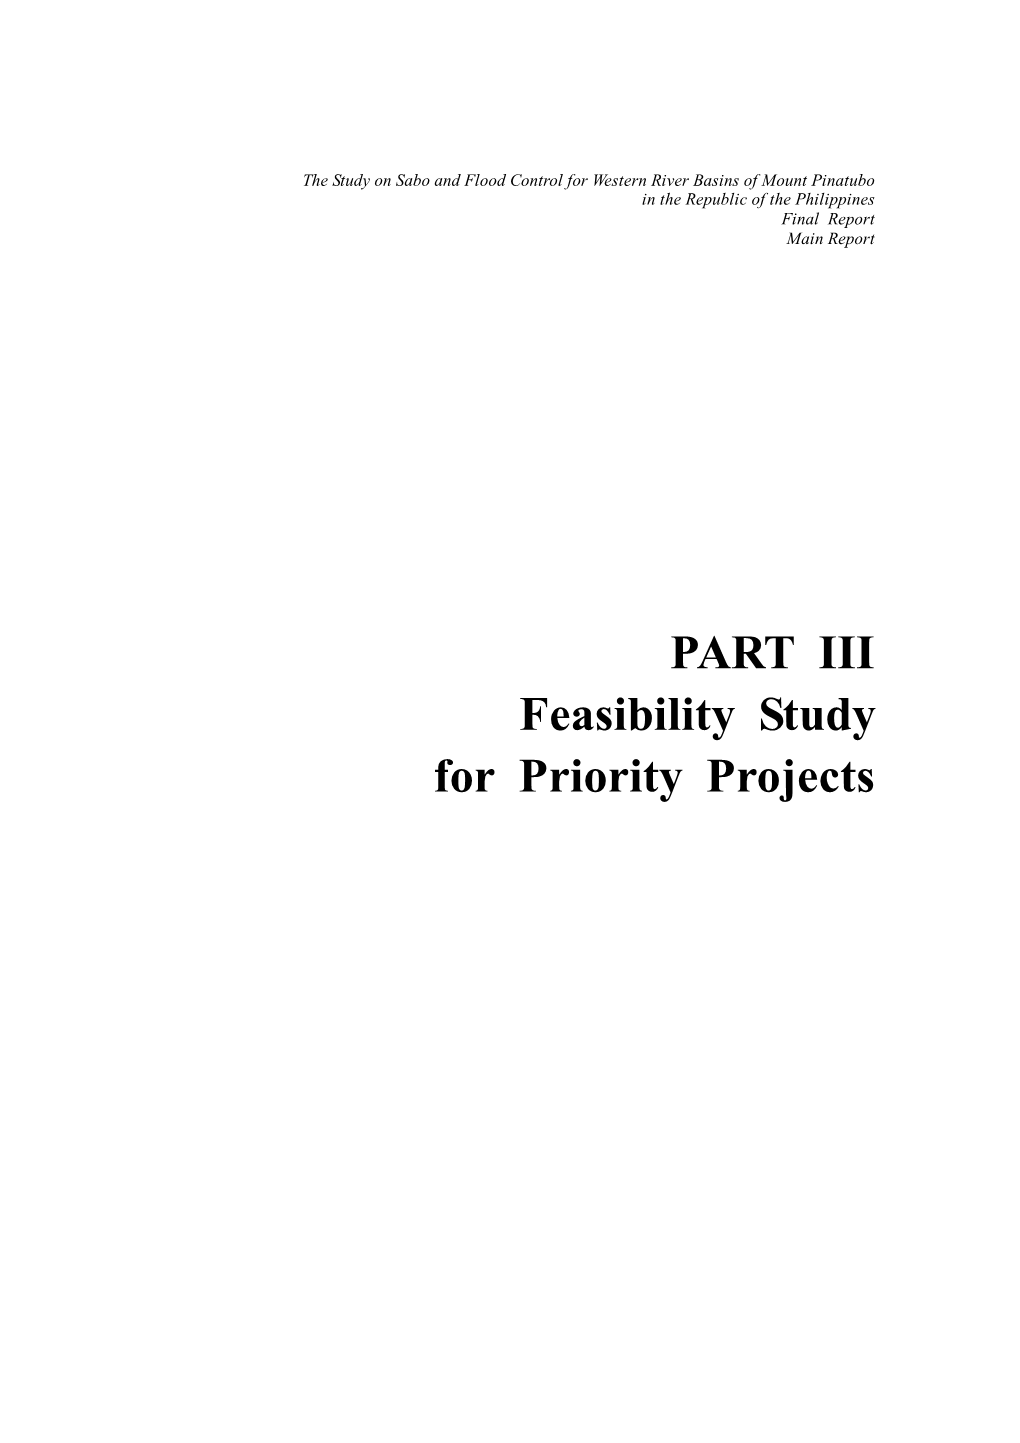 PART III Feasibility Study for Priority Projects CHAPTER 15 FEASIBILITY DESIGN of PRIORITY PROJECTS